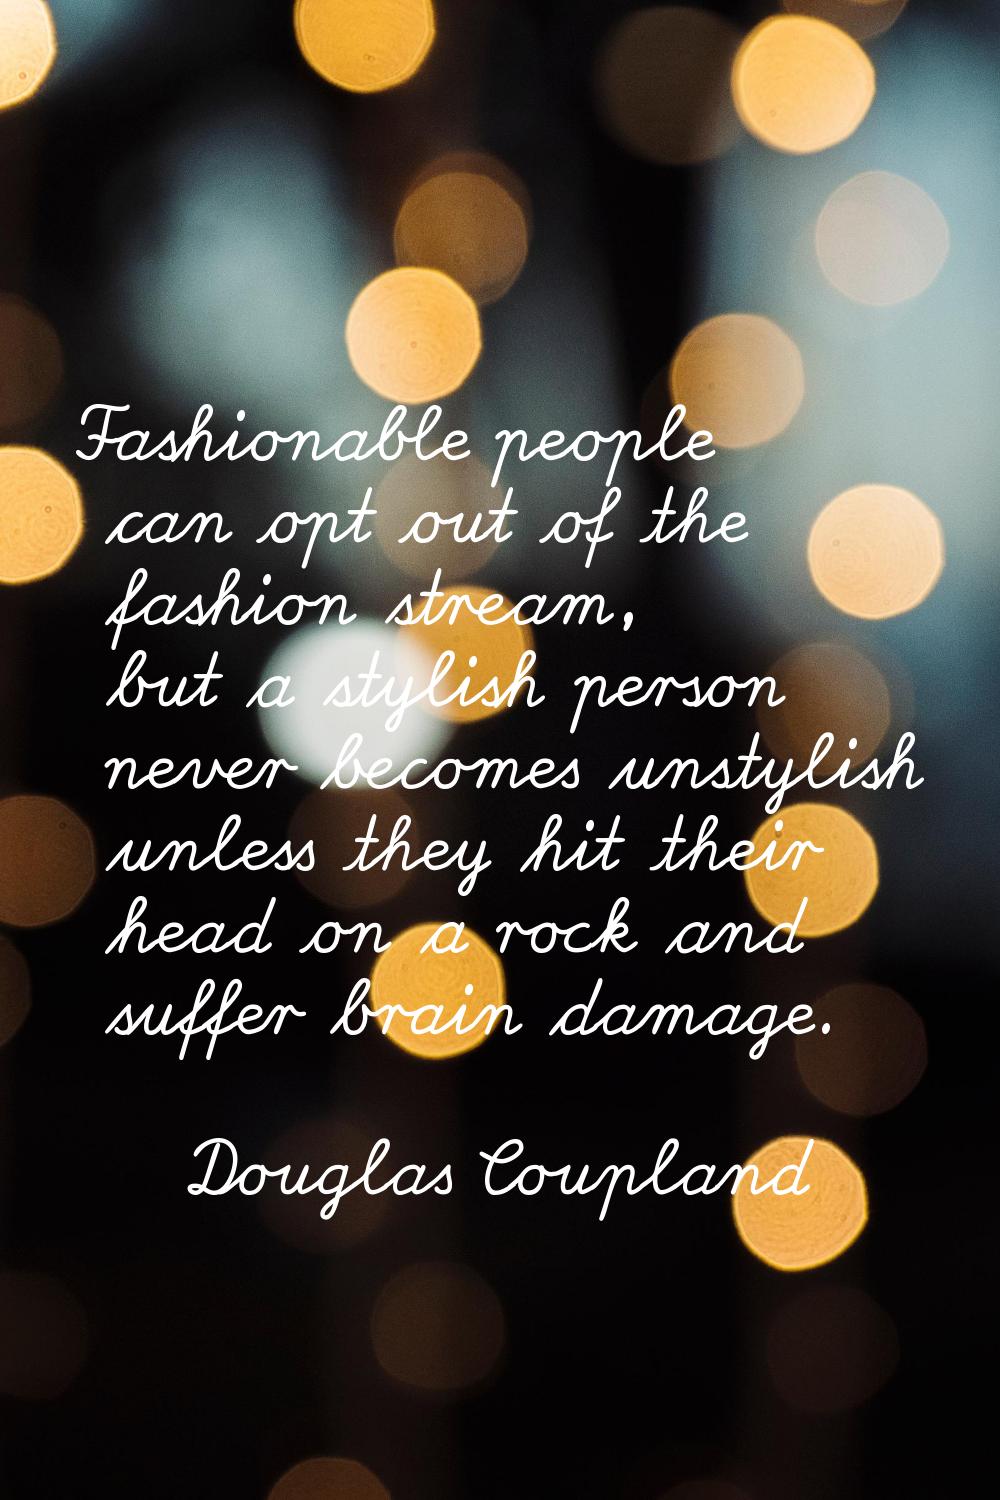 Fashionable people can opt out of the fashion stream, but a stylish person never becomes unstylish 